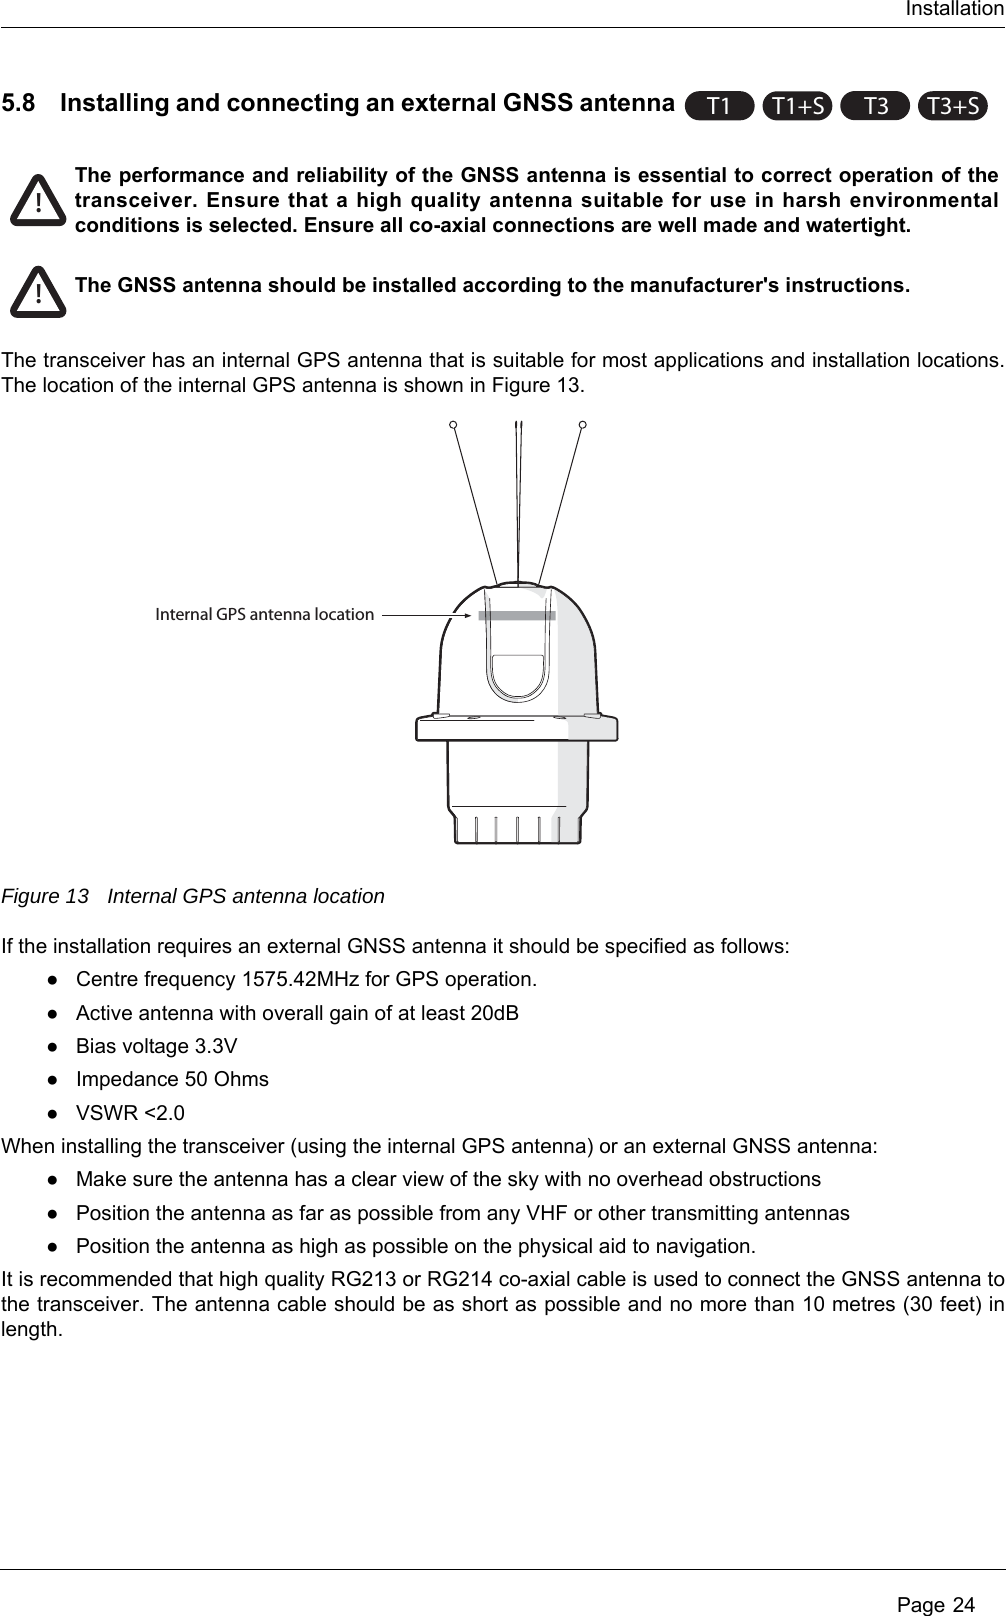 Installation Page 245.8 Installing and connecting an external GNSS antennaThe transceiver has an internal GPS antenna that is suitable for most applications and installation locations. The location of the internal GPS antenna is shown in Figure 13.Figure 13 Internal GPS antenna locationIf the installation requires an external GNSS antenna it should be specified as follows:●Centre frequency 1575.42MHz for GPS operation. ●Active antenna with overall gain of at least 20dB●Bias voltage 3.3V●Impedance 50 Ohms●VSWR &lt;2.0When installing the transceiver (using the internal GPS antenna) or an external GNSS antenna:●Make sure the antenna has a clear view of the sky with no overhead obstructions●Position the antenna as far as possible from any VHF or other transmitting antennas●Position the antenna as high as possible on the physical aid to navigation.It is recommended that high quality RG213 or RG214 co-axial cable is used to connect the GNSS antenna to the transceiver. The antenna cable should be as short as possible and no more than 10 metres (30 feet) in length.T1 T1+ST3T3+S!The performance and reliability of the GNSS antenna is essential to correct operation of the transceiver. Ensure that a high quality antenna suitable for use in harsh environmental conditions is selected. Ensure all co-axial connections are well made and watertight.!The GNSS antenna should be installed according to the manufacturer&apos;s instructions.Internal GPS antenna location